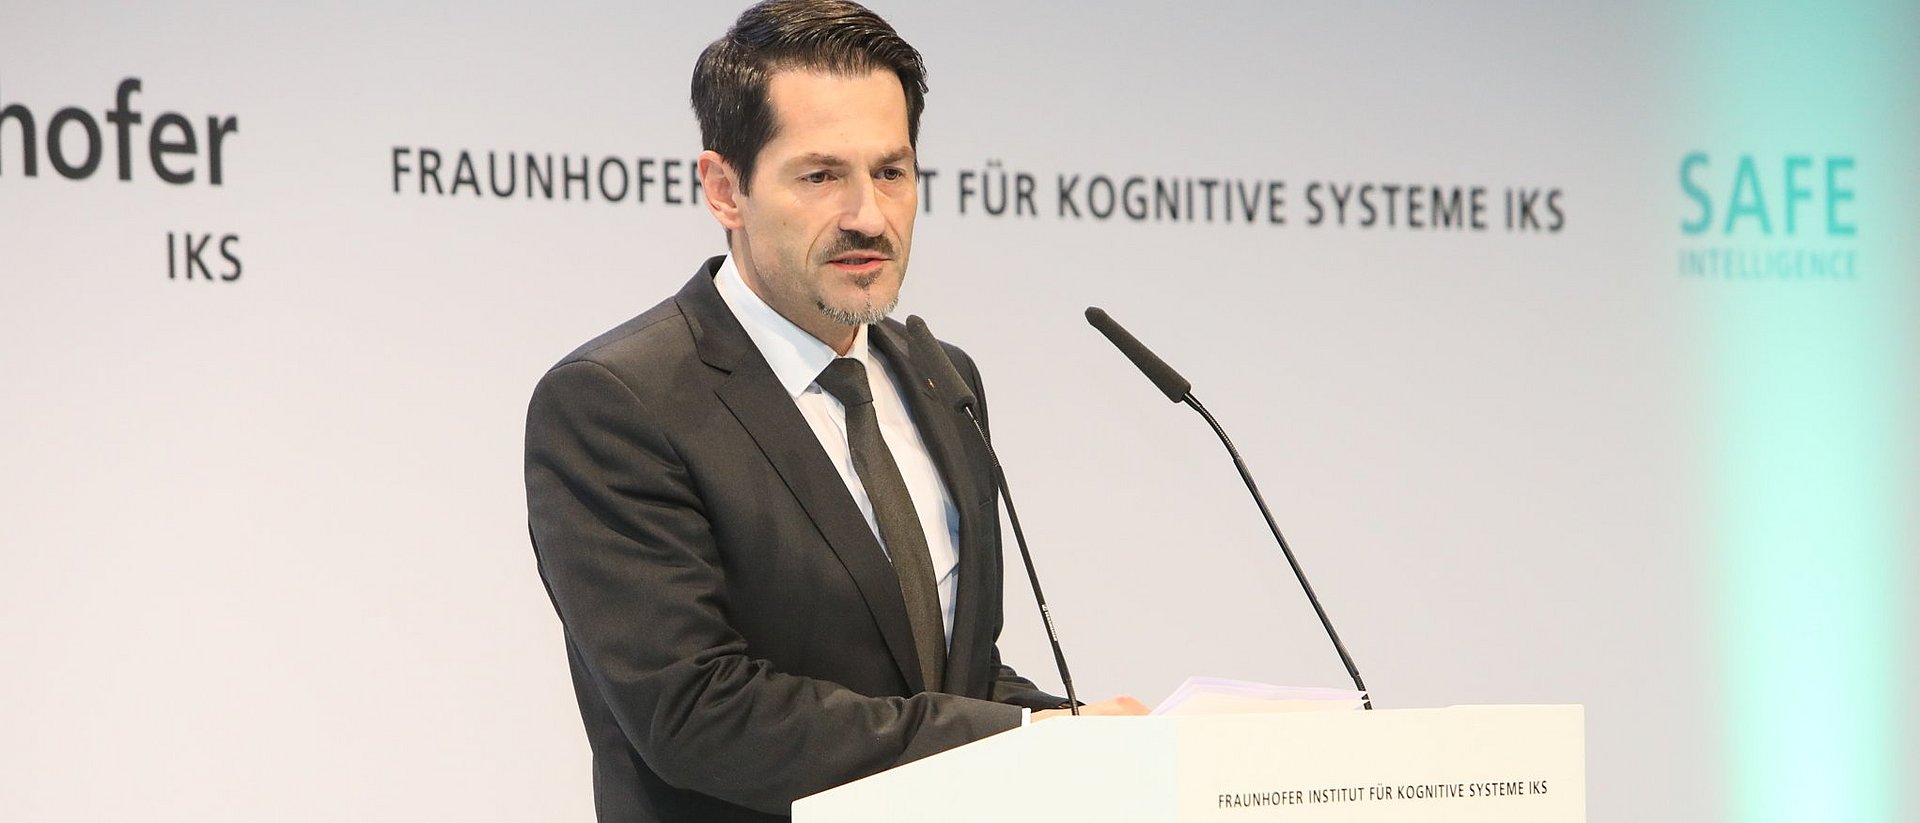 Prof. Thomas F. Hofmann, President of TUM a the opening ceremony for the Fraunhofer Institute for Cognitive Systems.